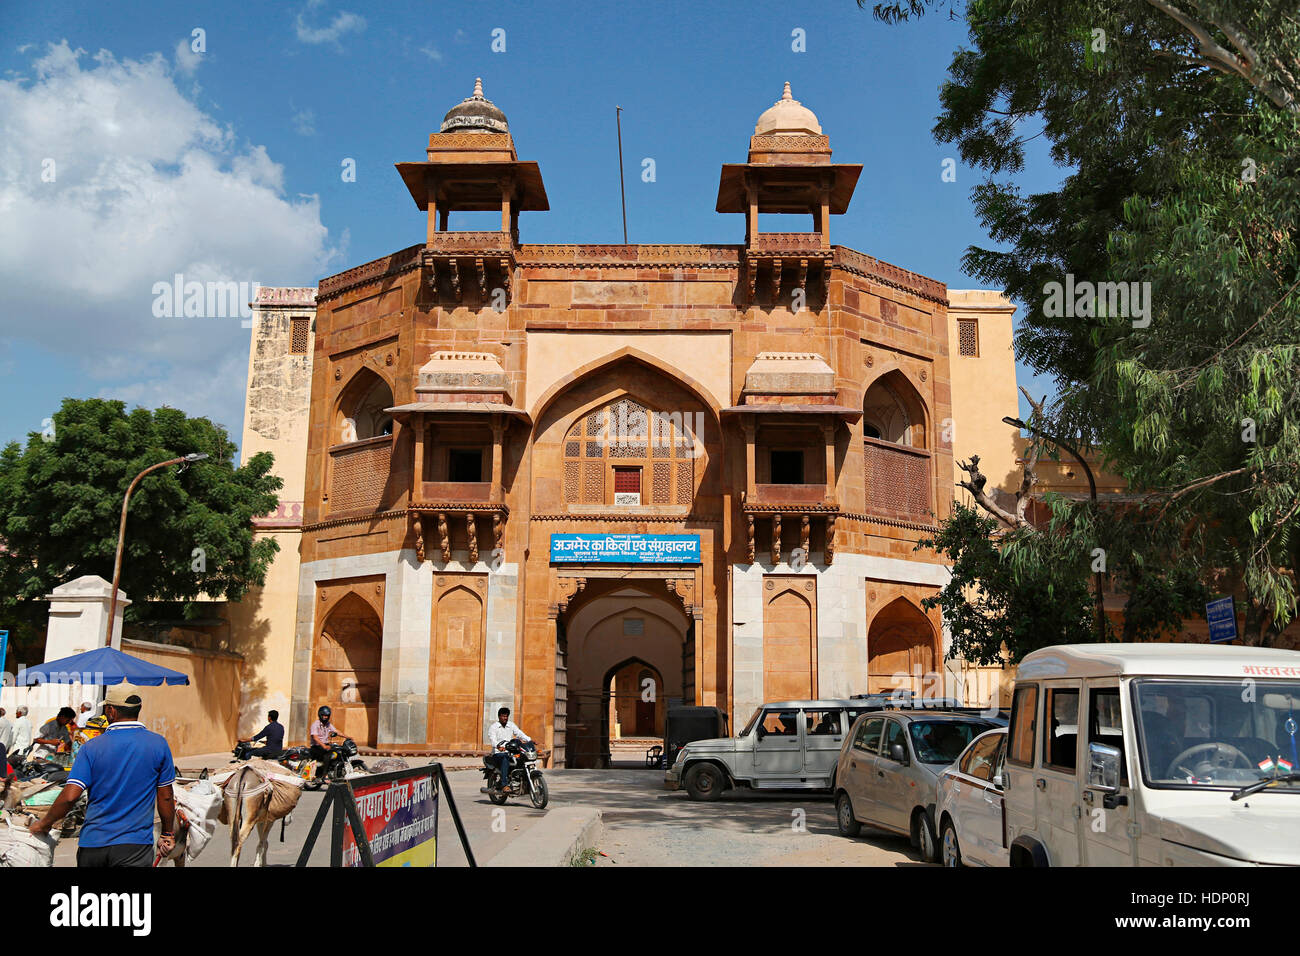 Govt Museum and Fort in in Ajmer, Rajasthan, India Stock Photo